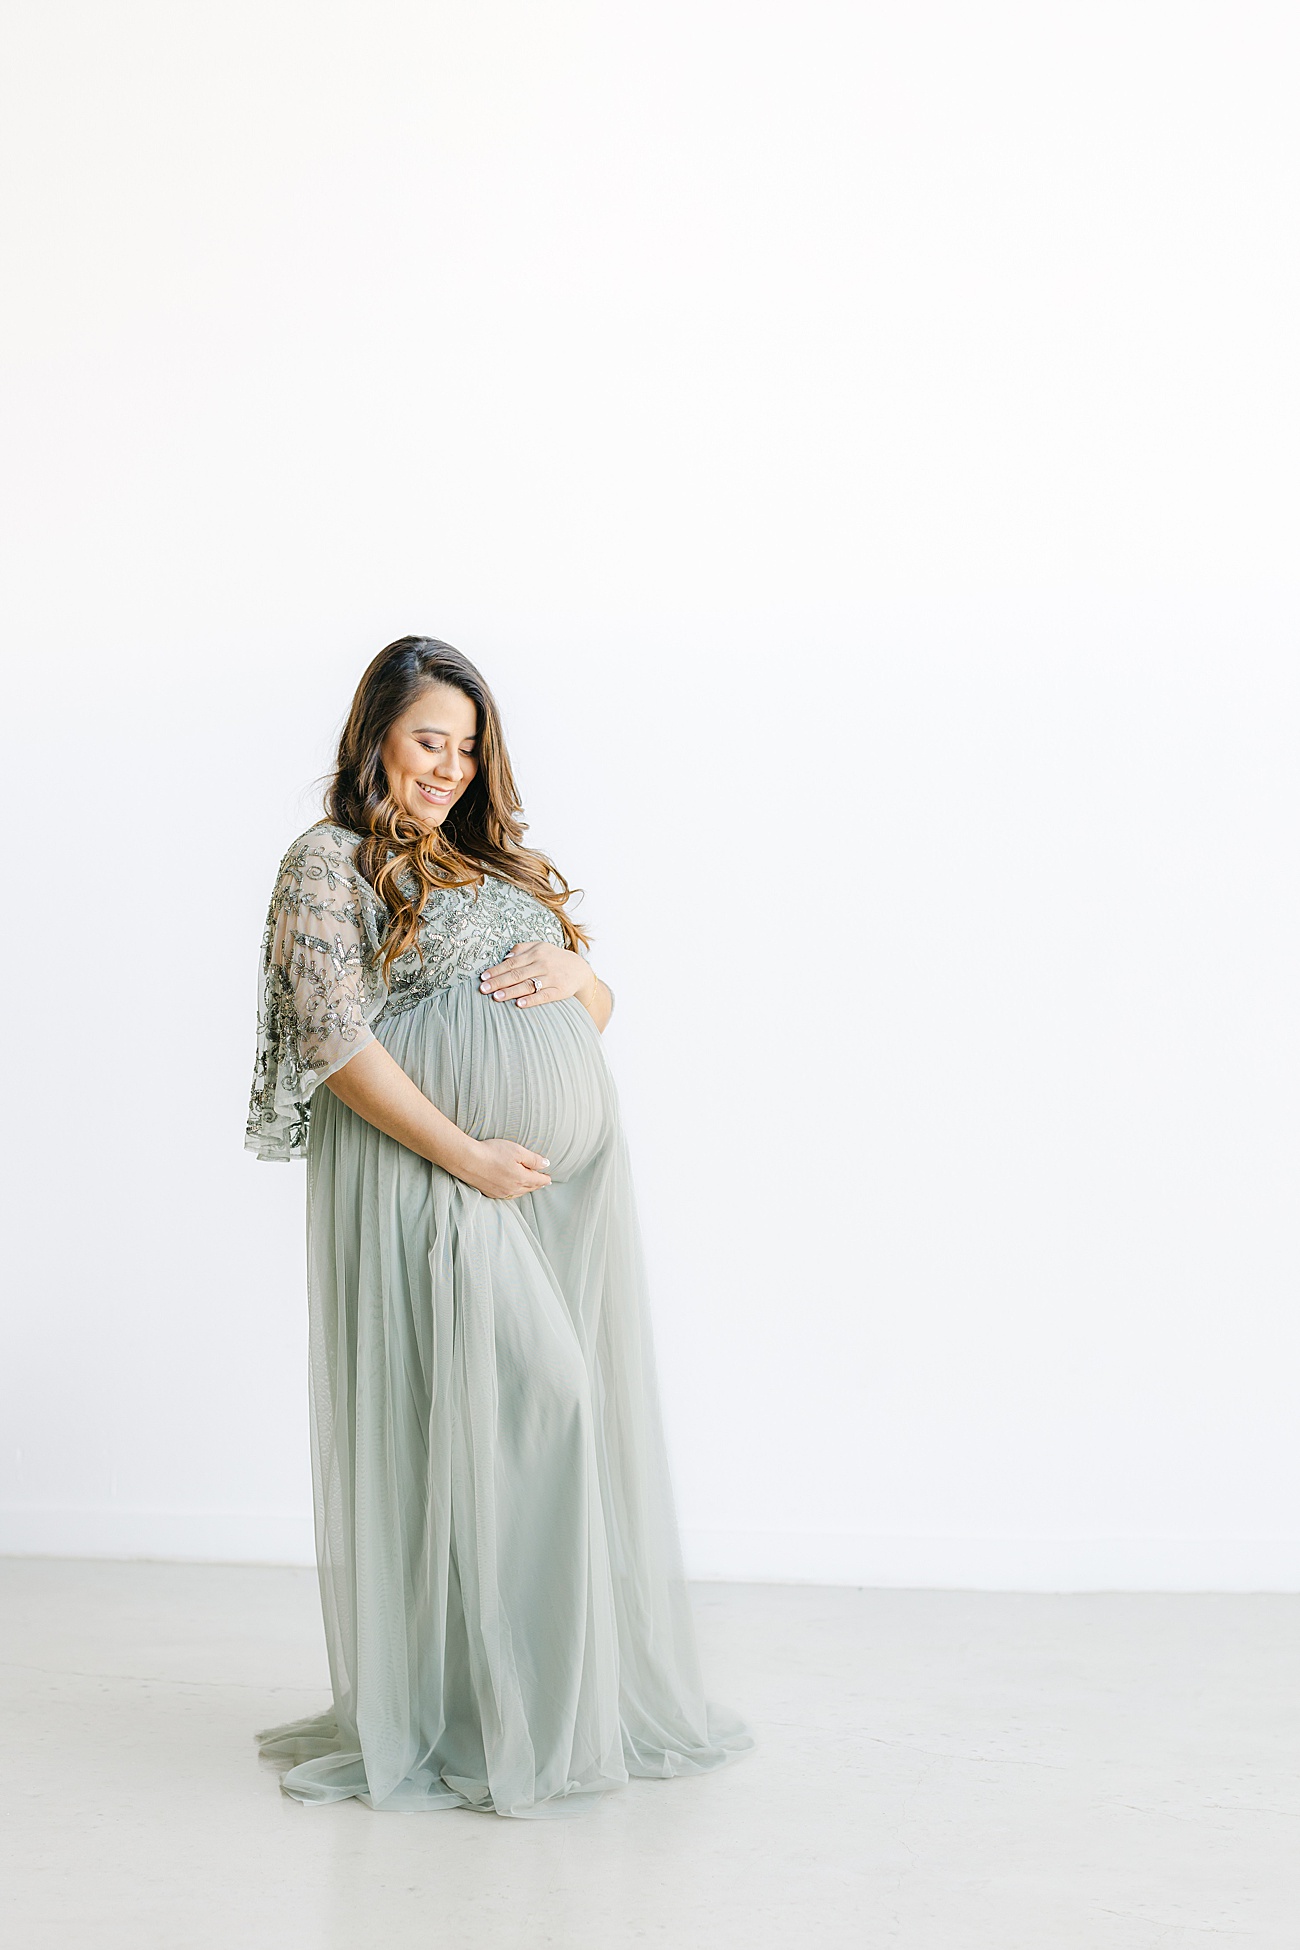 Mama-to-be wearing sage green maternity dress in studio maternity session for first baby. Photo by Sana Ahmed Photography.